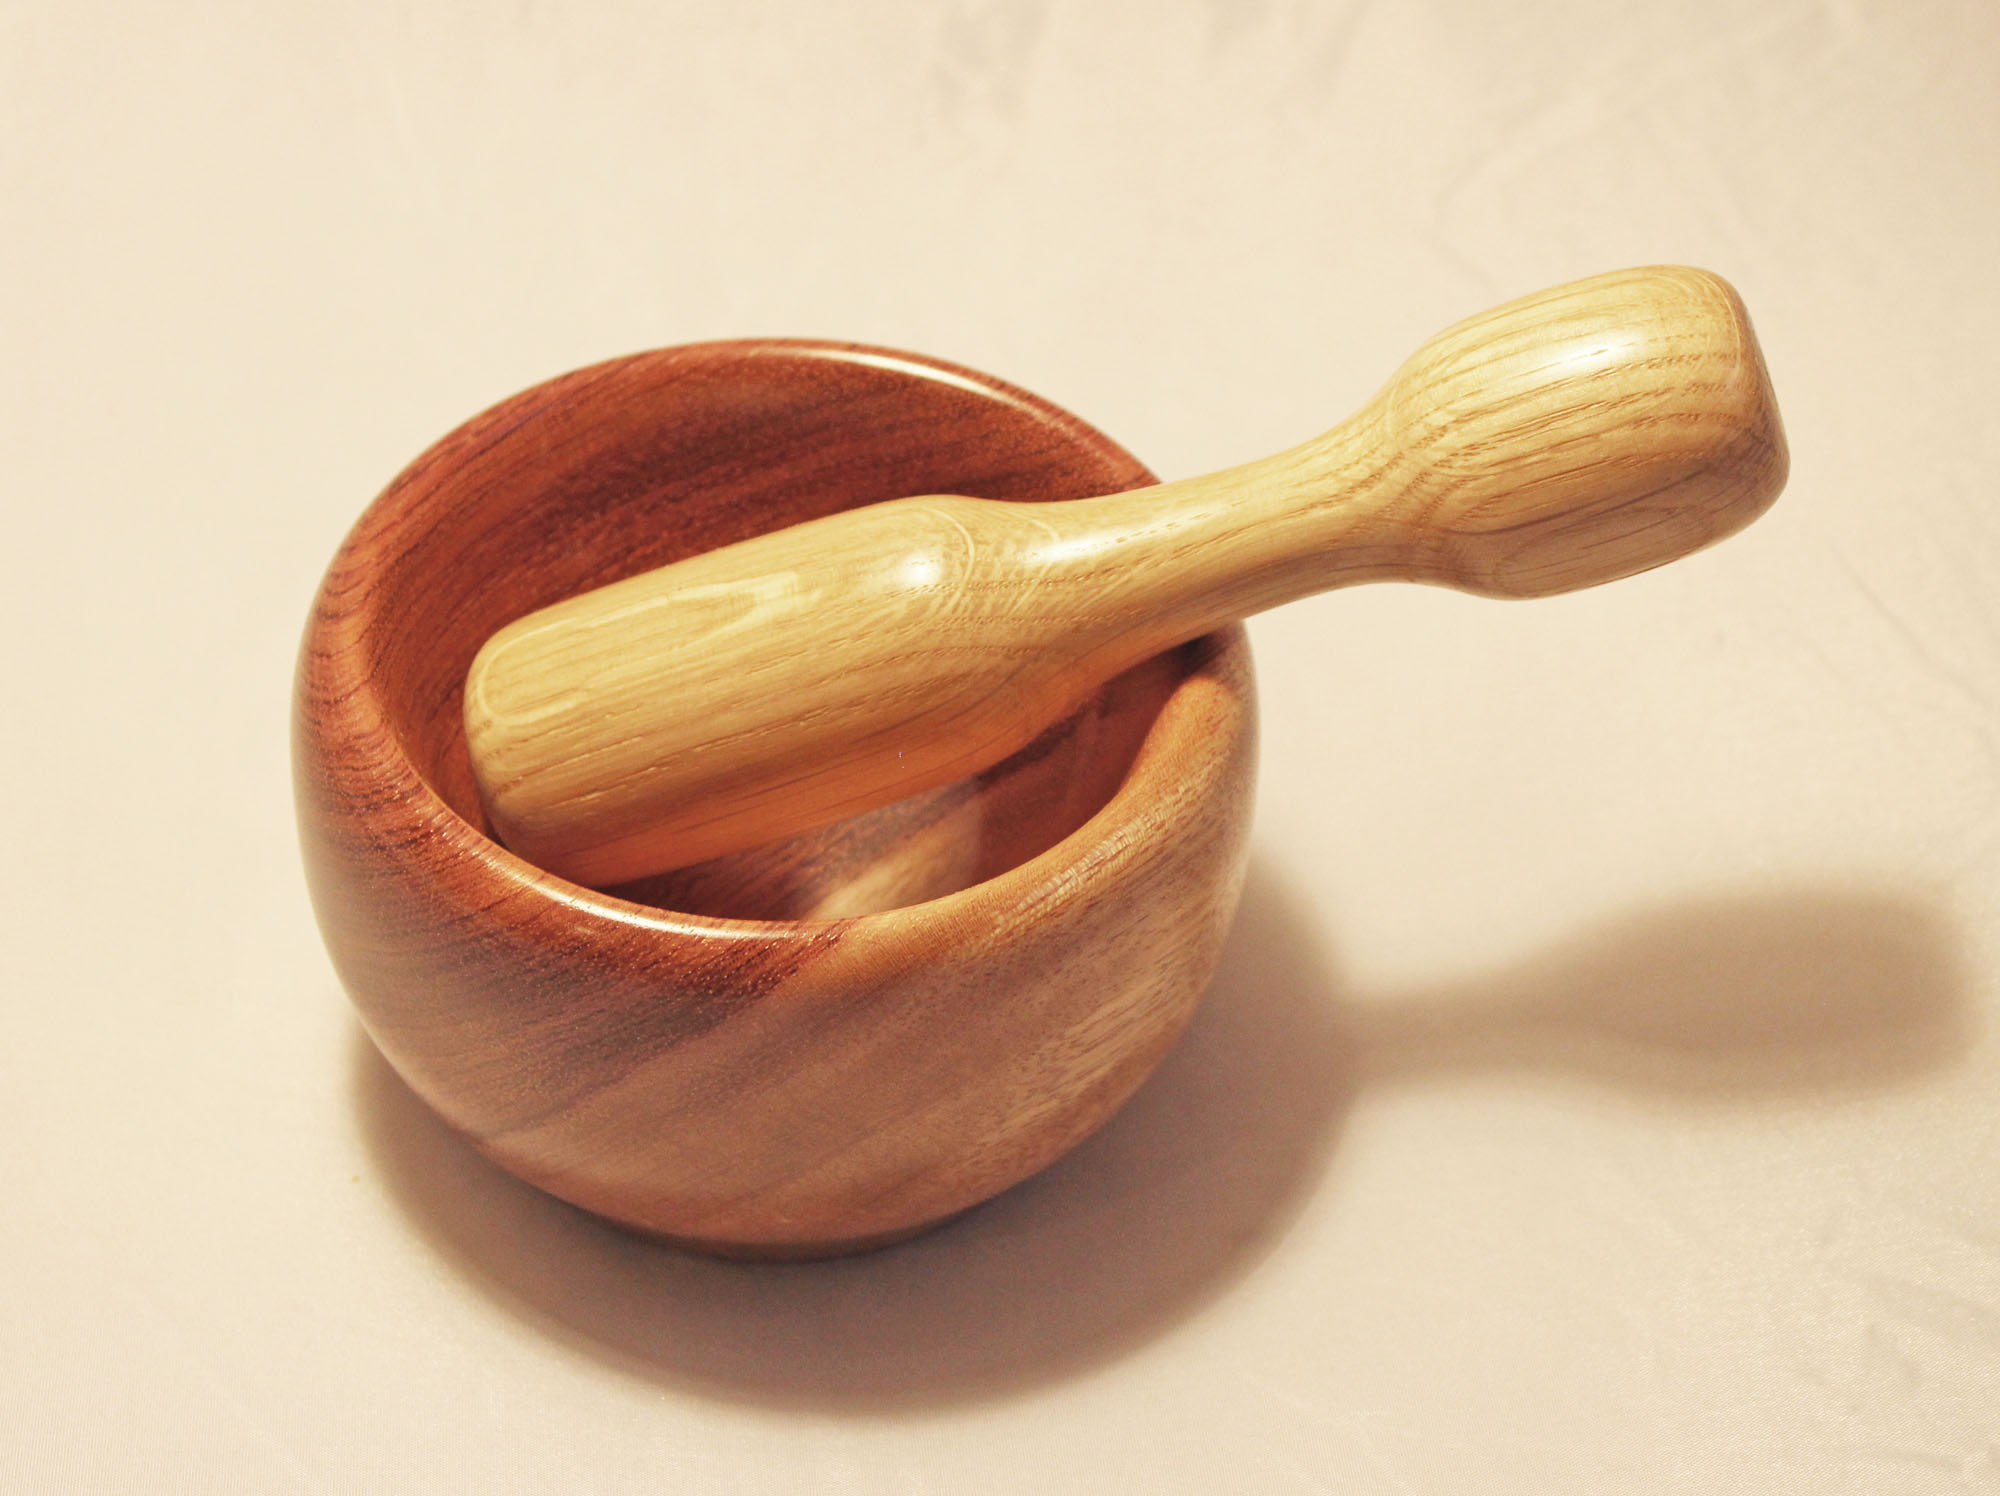 wood turning projects for beginners mortar and pestle